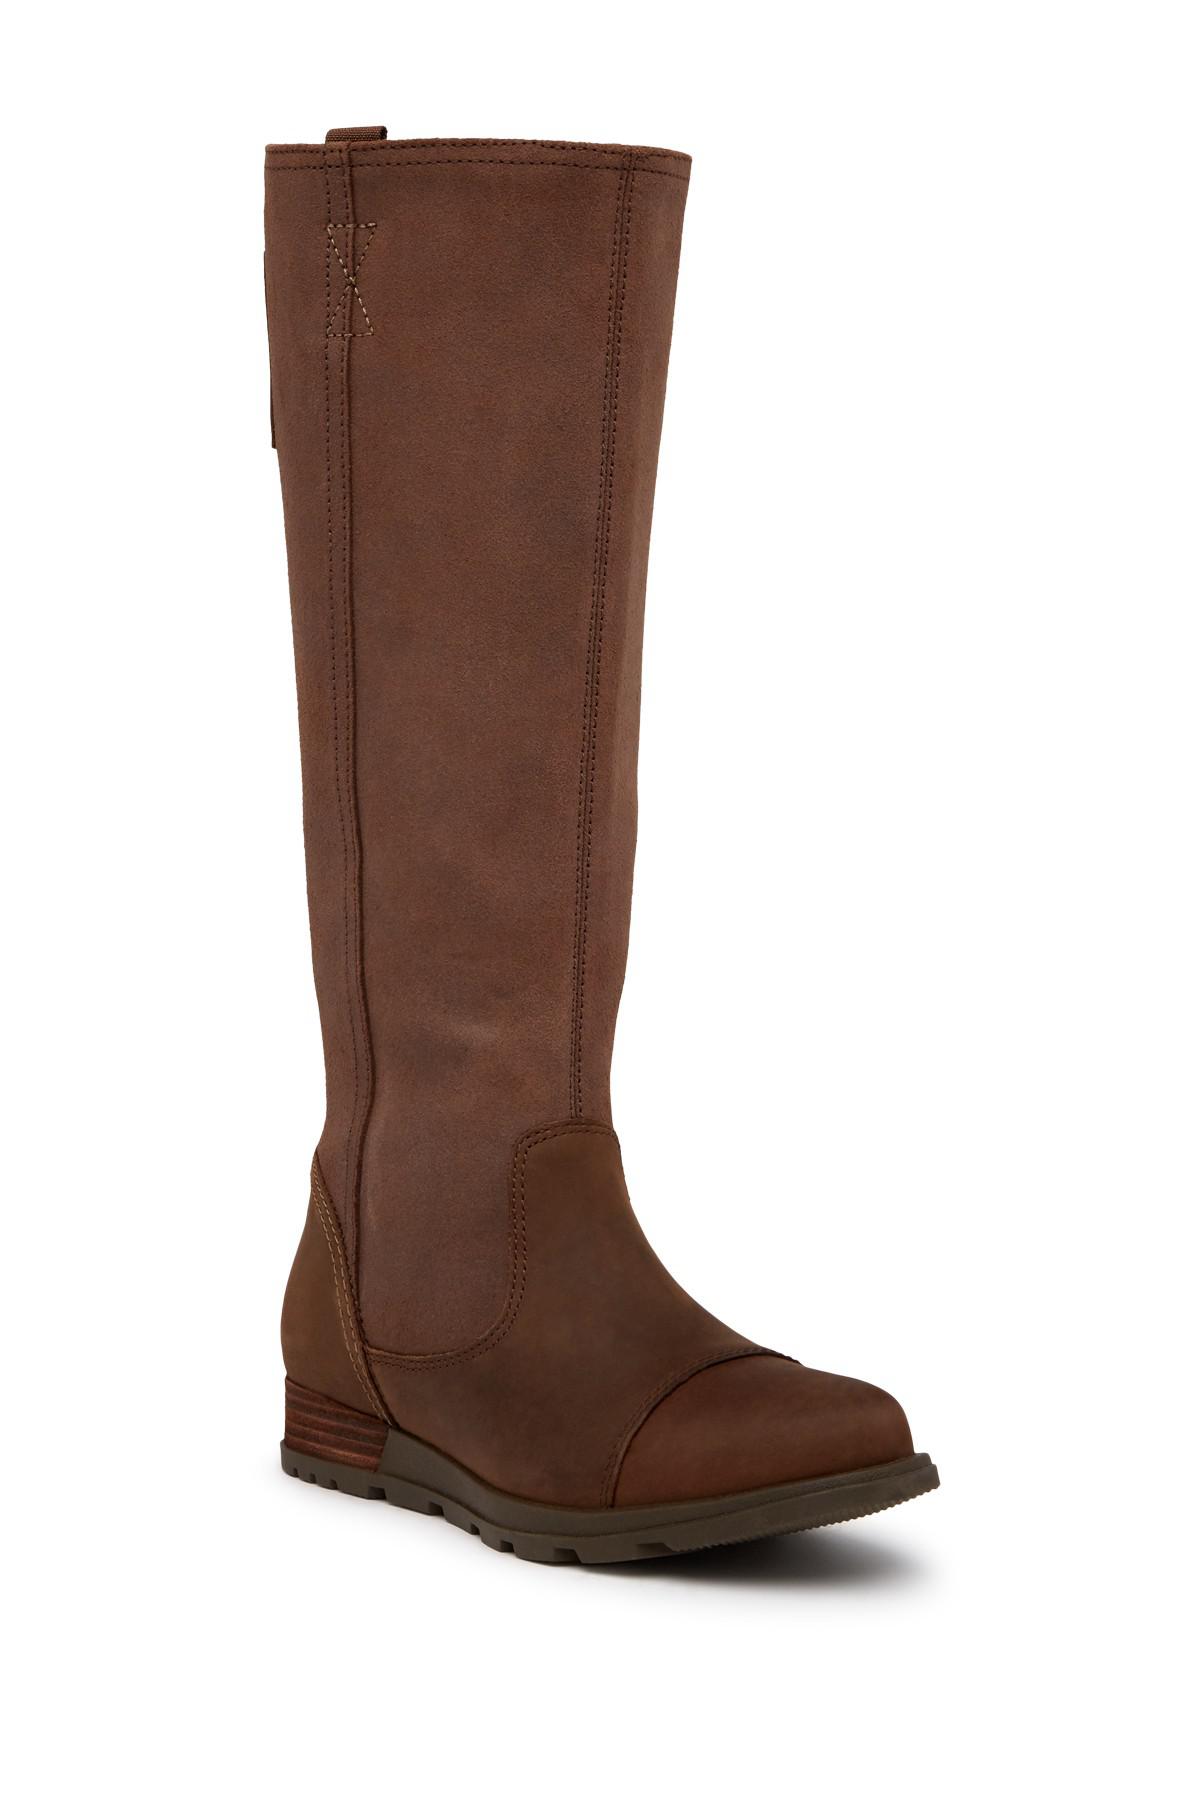 Sorel Major Tall Leather Boot in Brown - Lyst